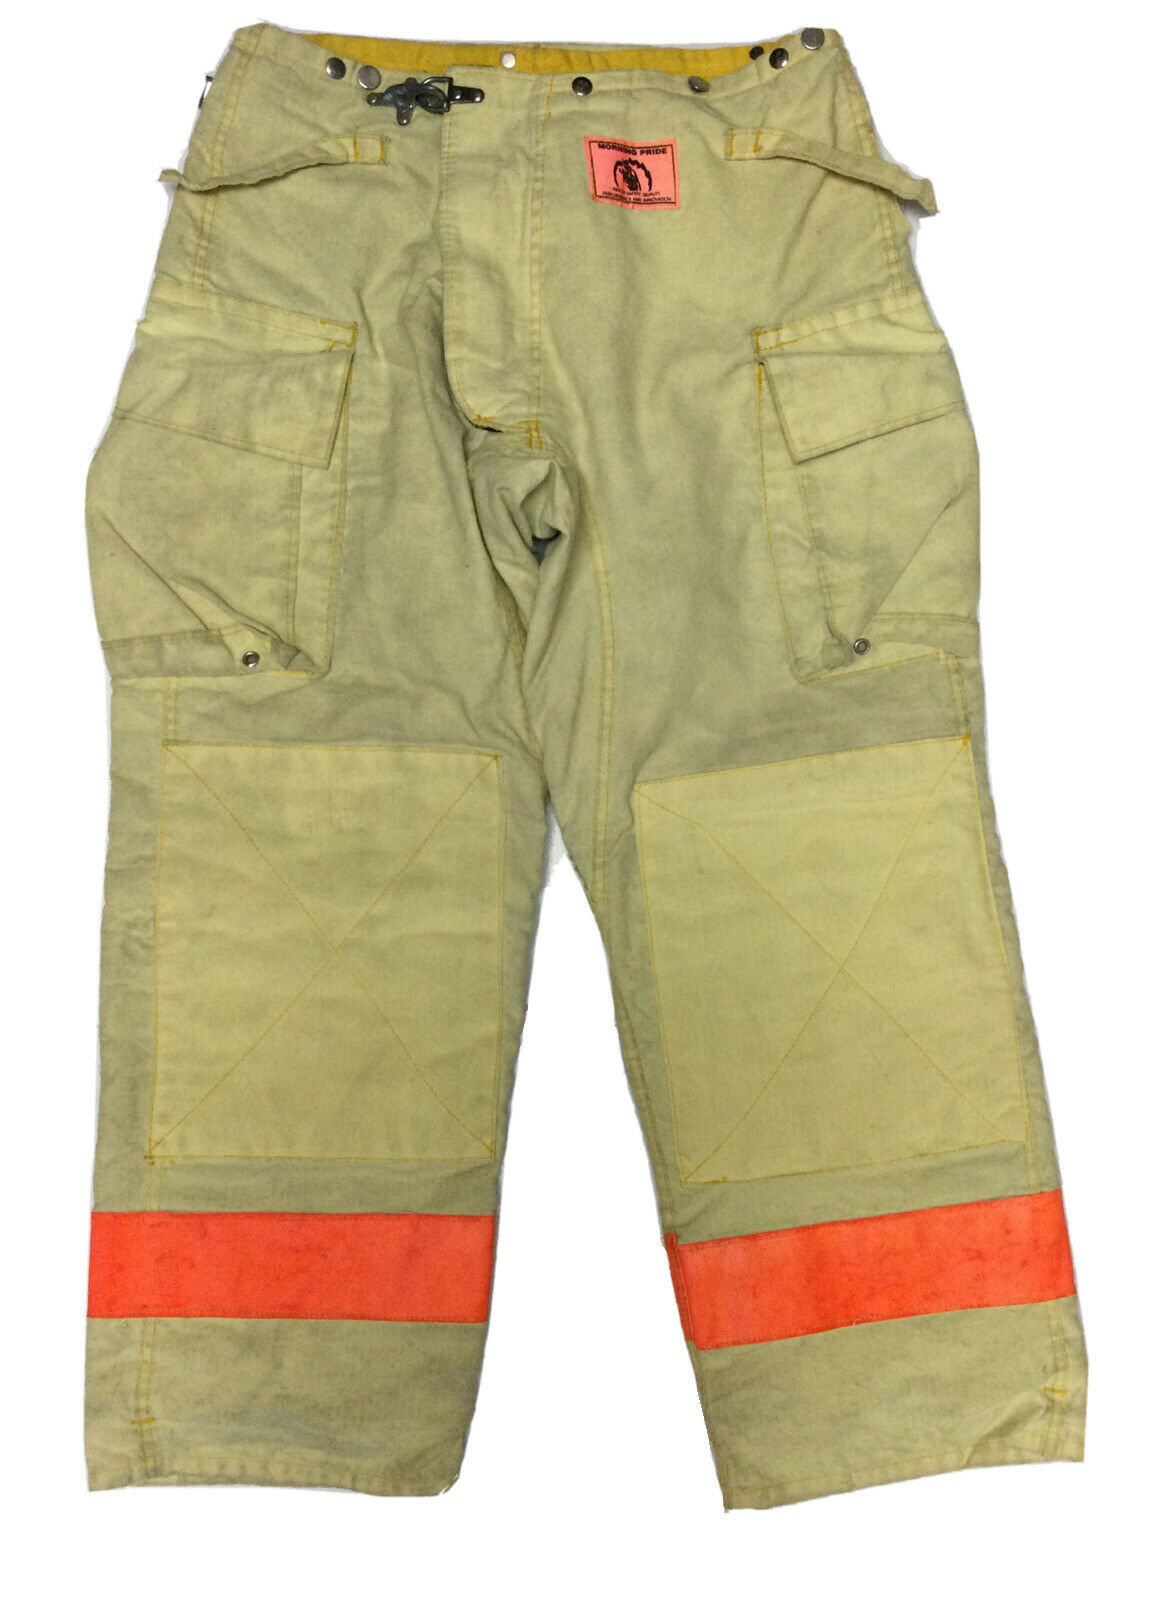 36x32 36l Janesville Lion Yellow Firefighter Turnout Pants With Orange P1341